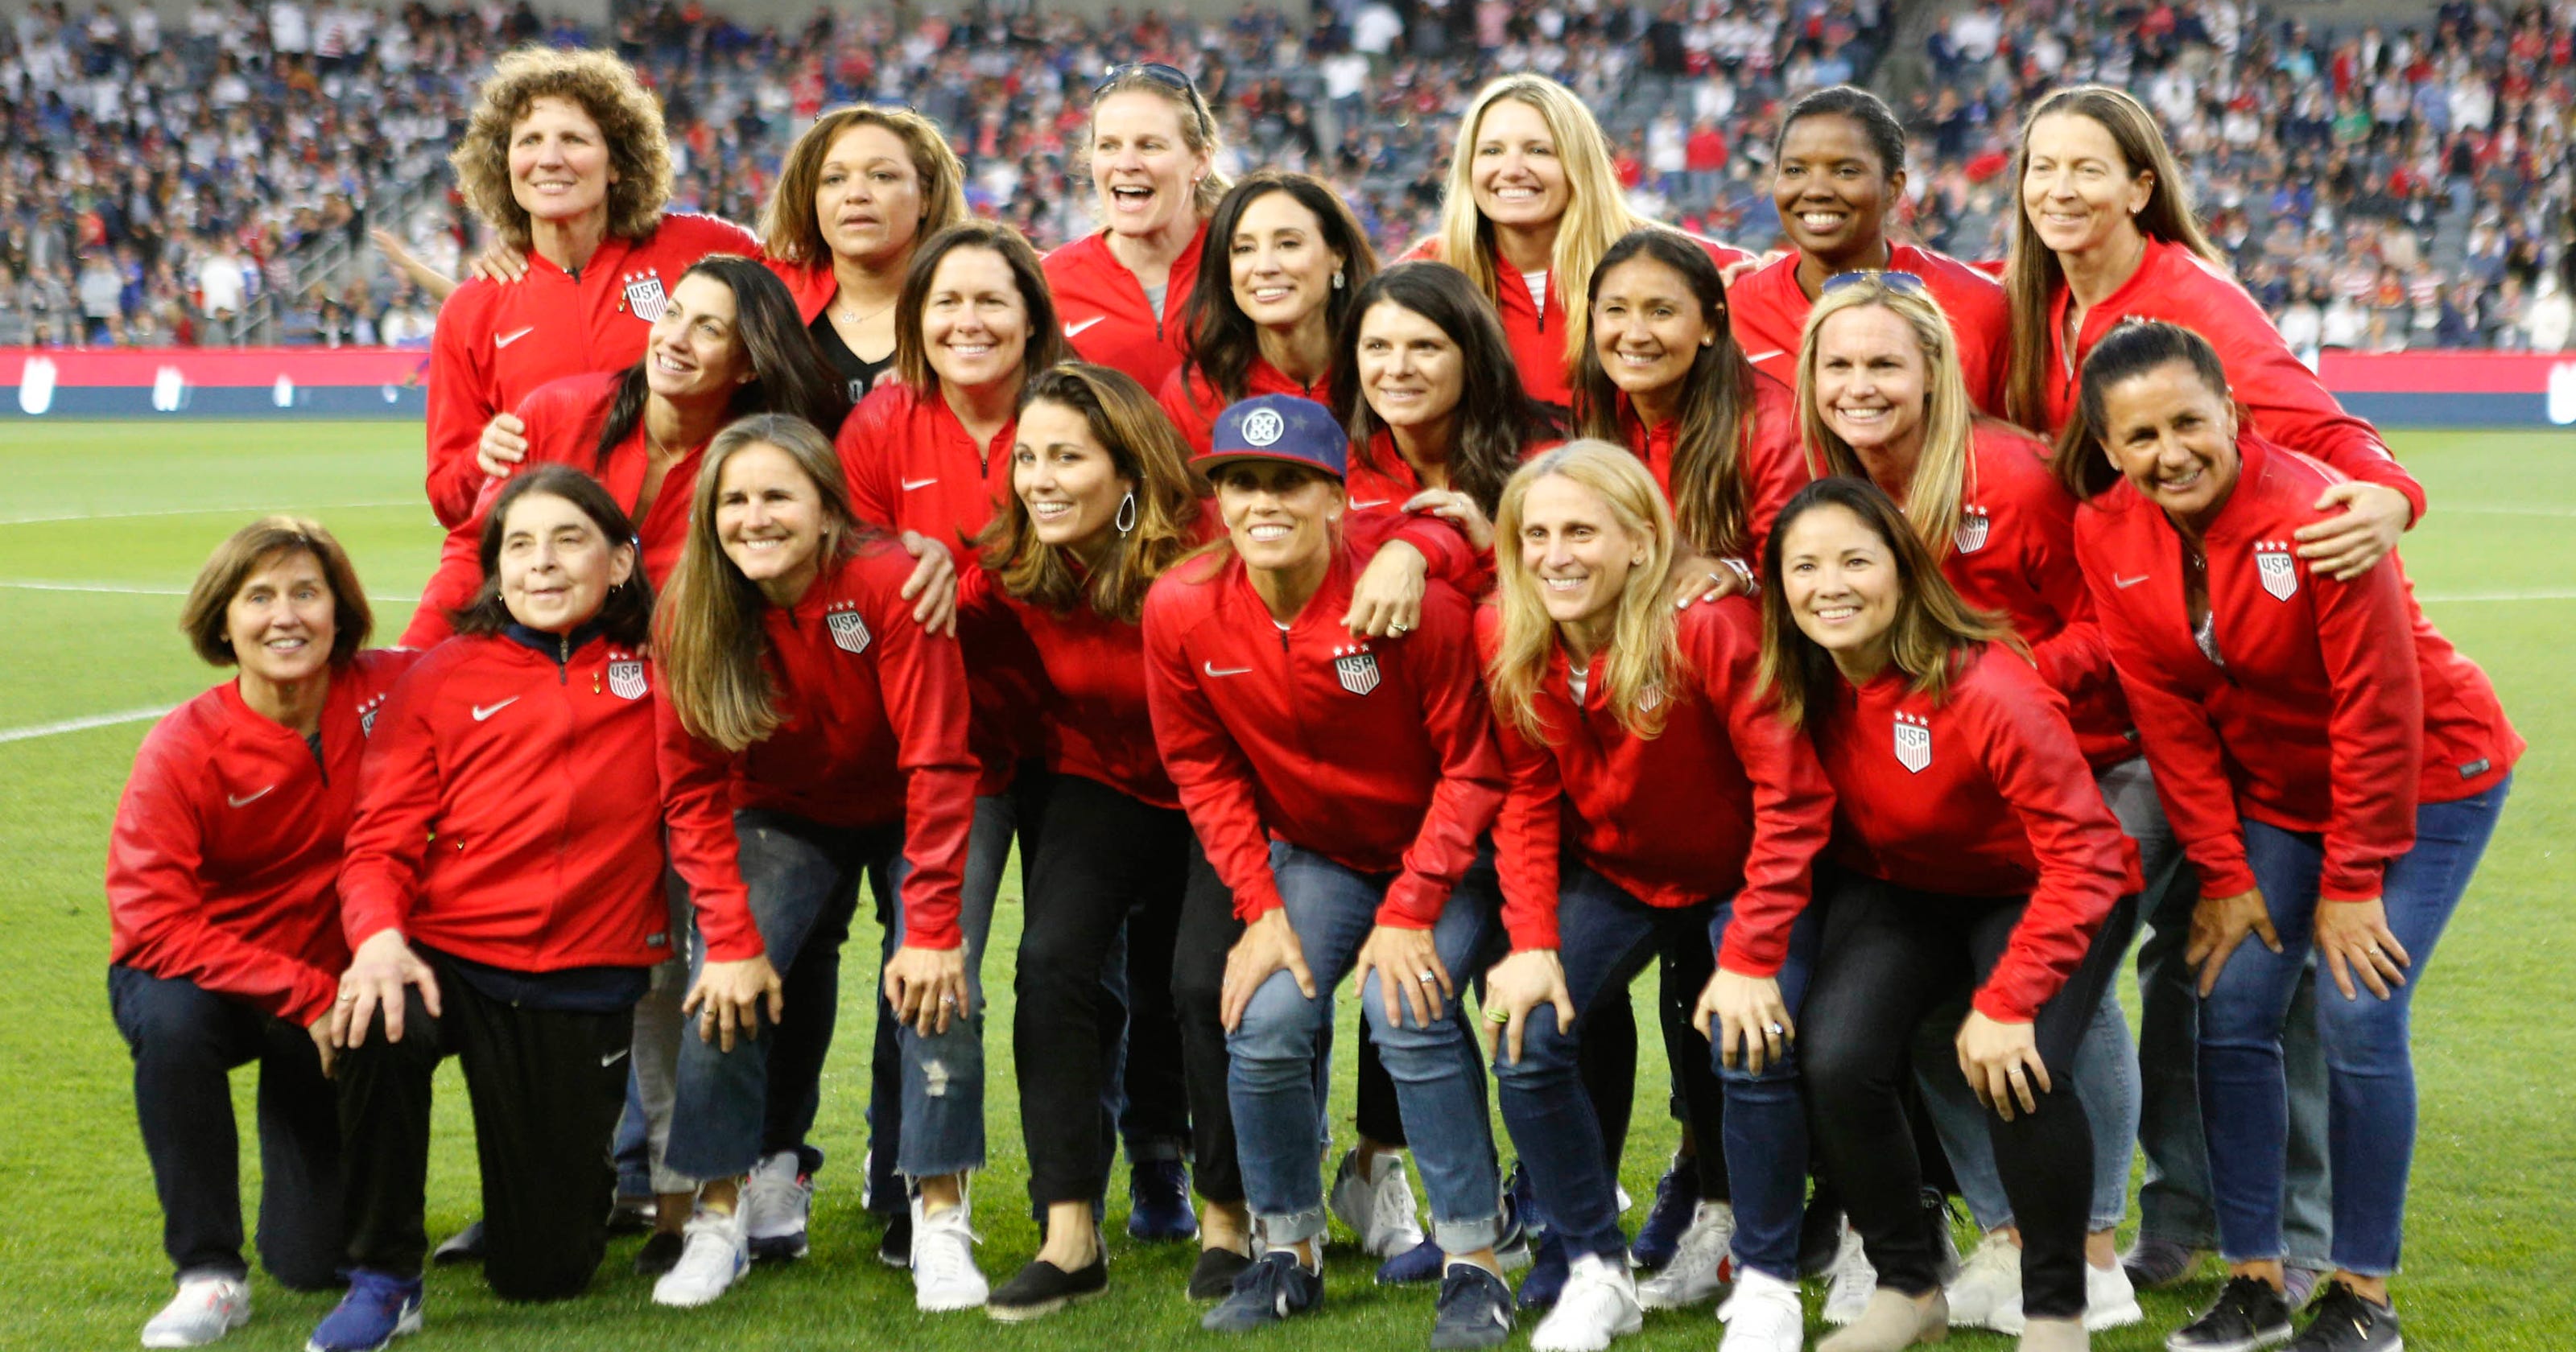 2019-world-cup-us-women-s-soccer-team-changed-the-game-20-years-ago